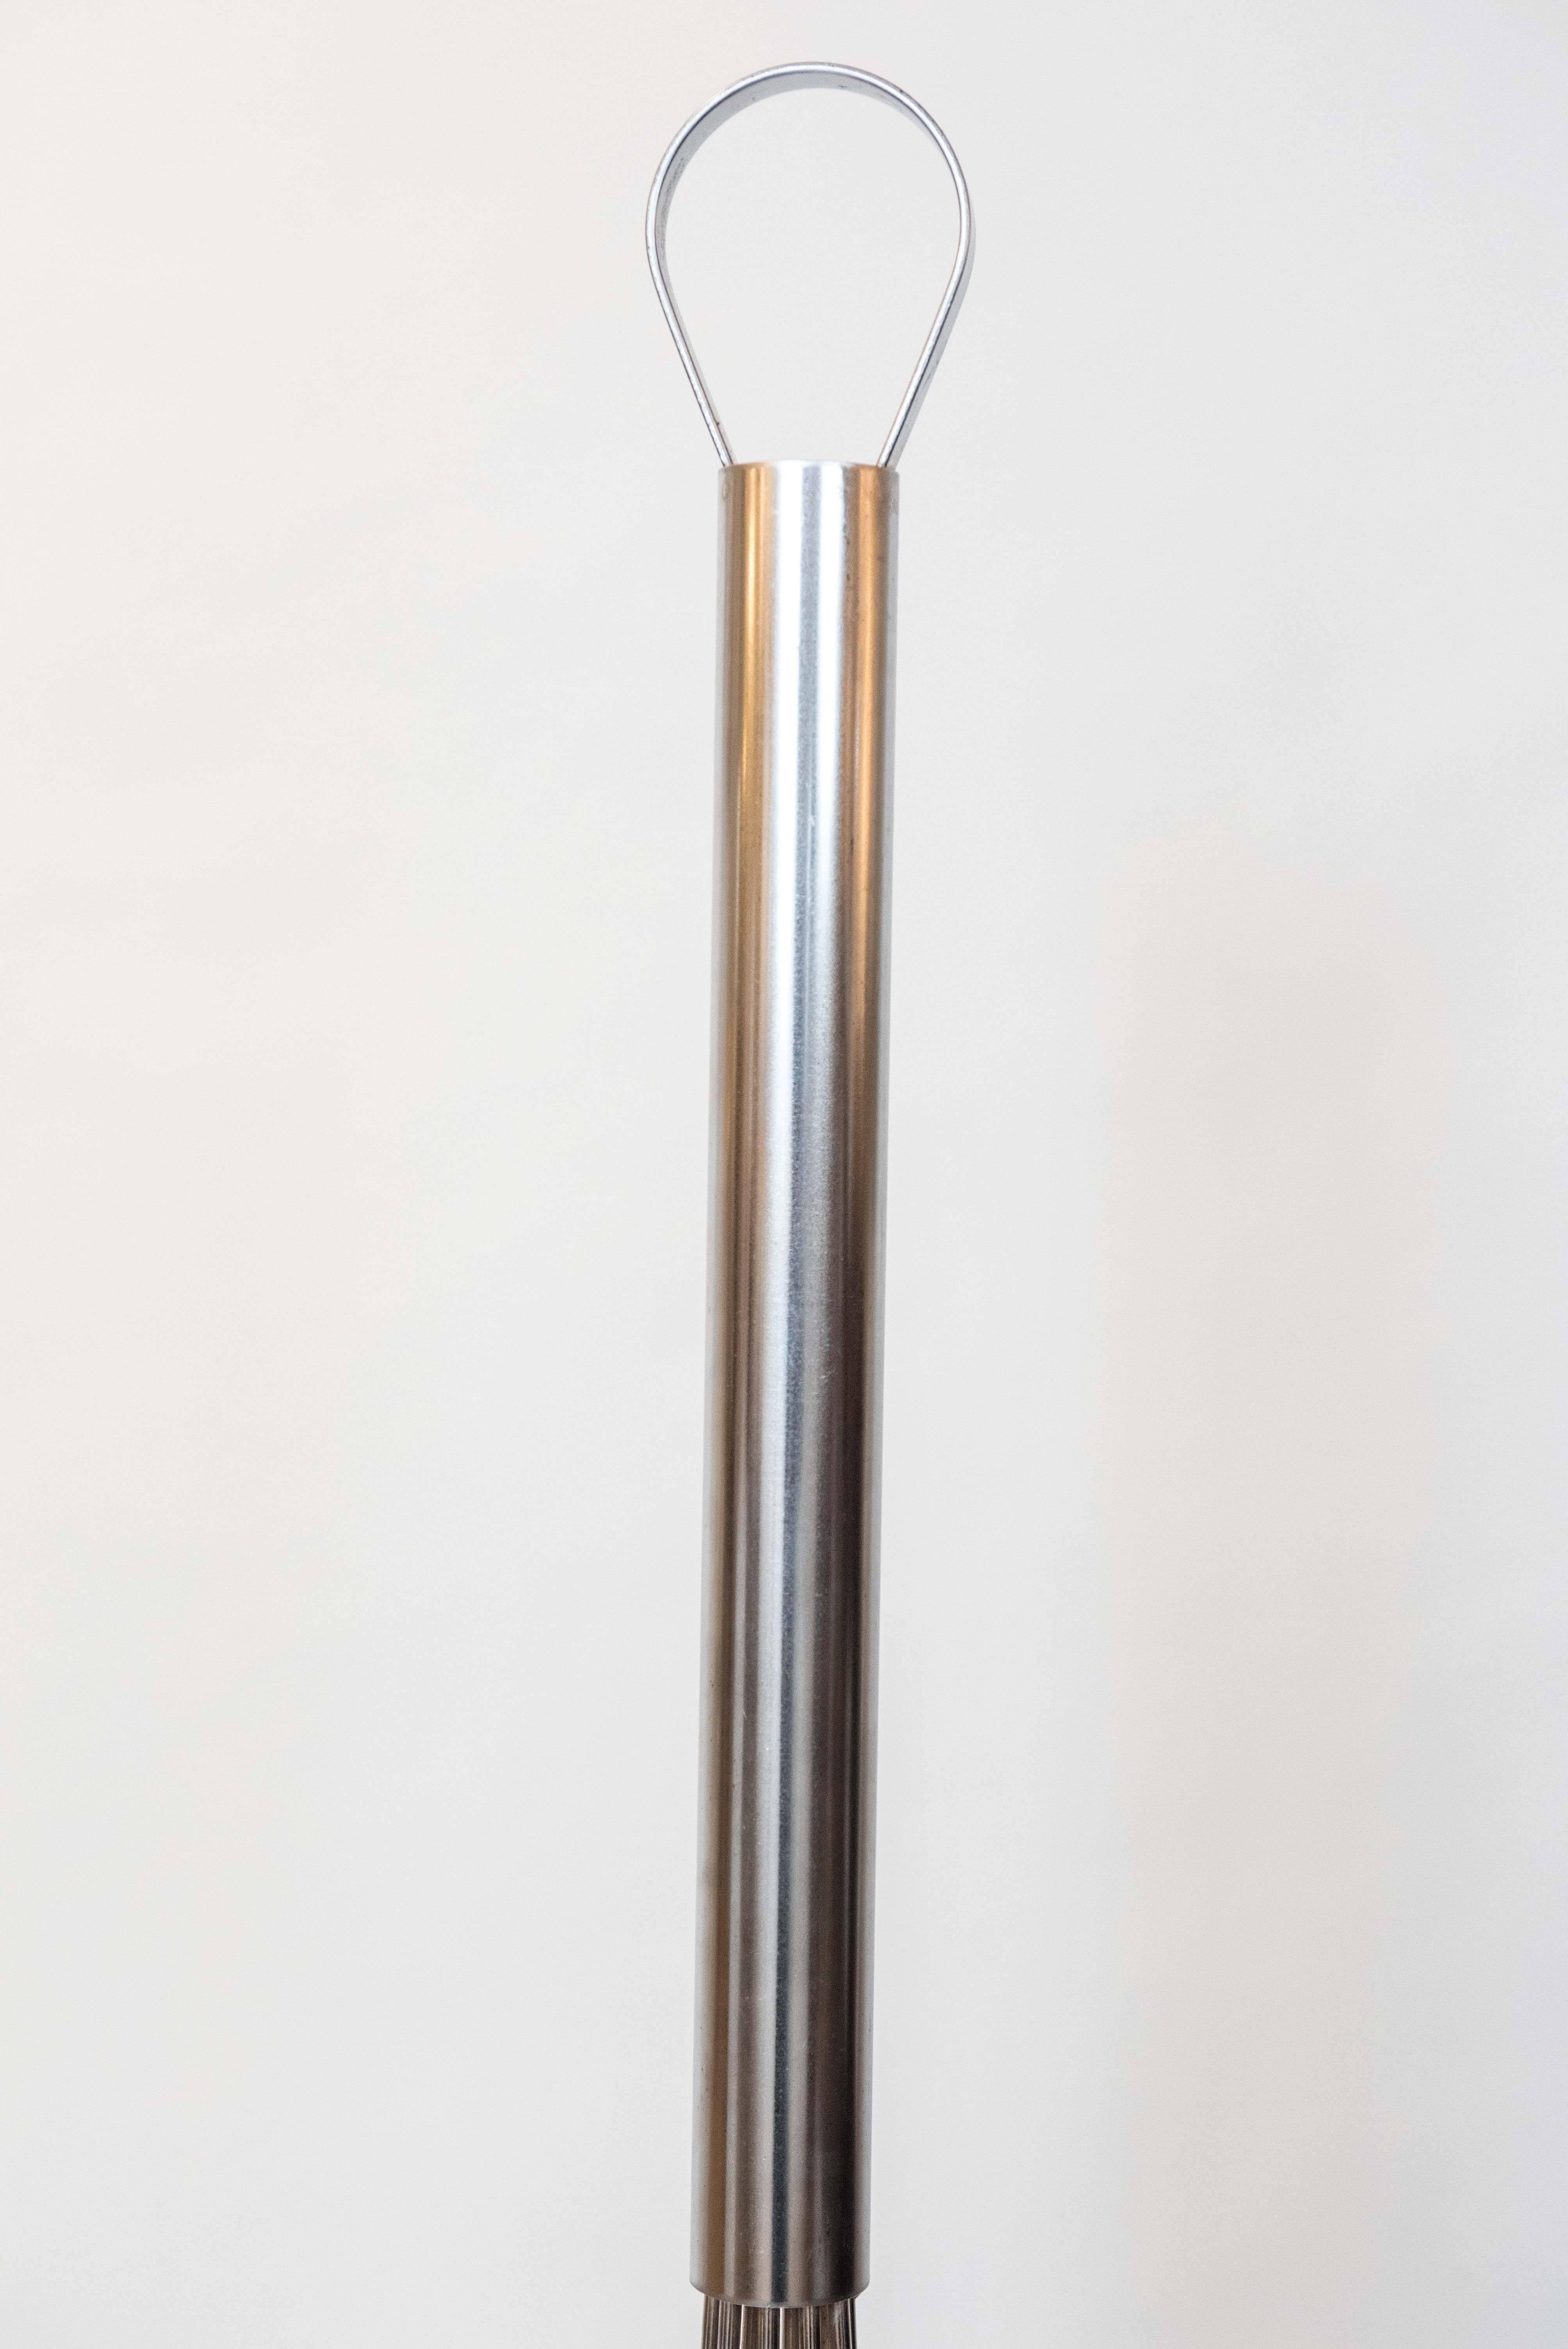 Welded Oversized Whisk by Curtis Jere